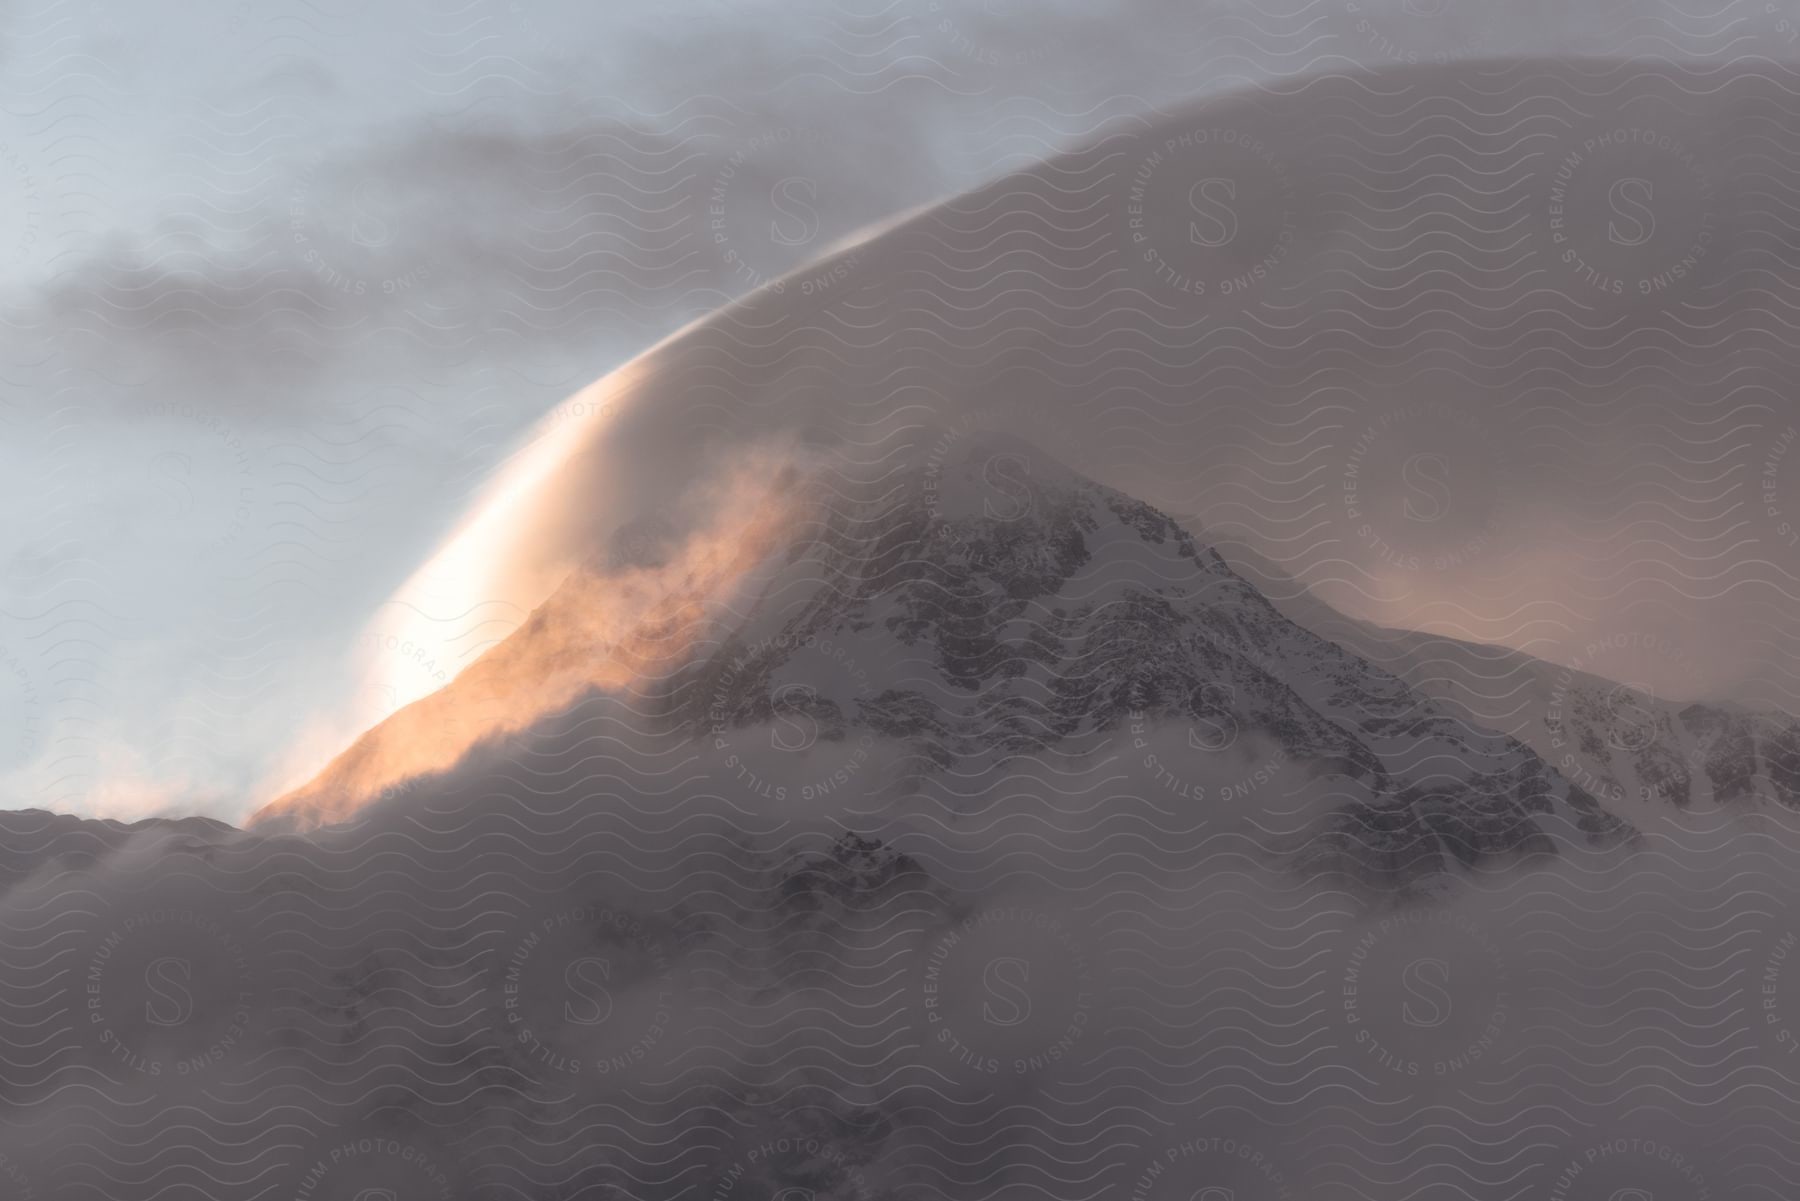 A snow covered mountain with a cloud arching over it illuminated by the sun in a cloudy sky